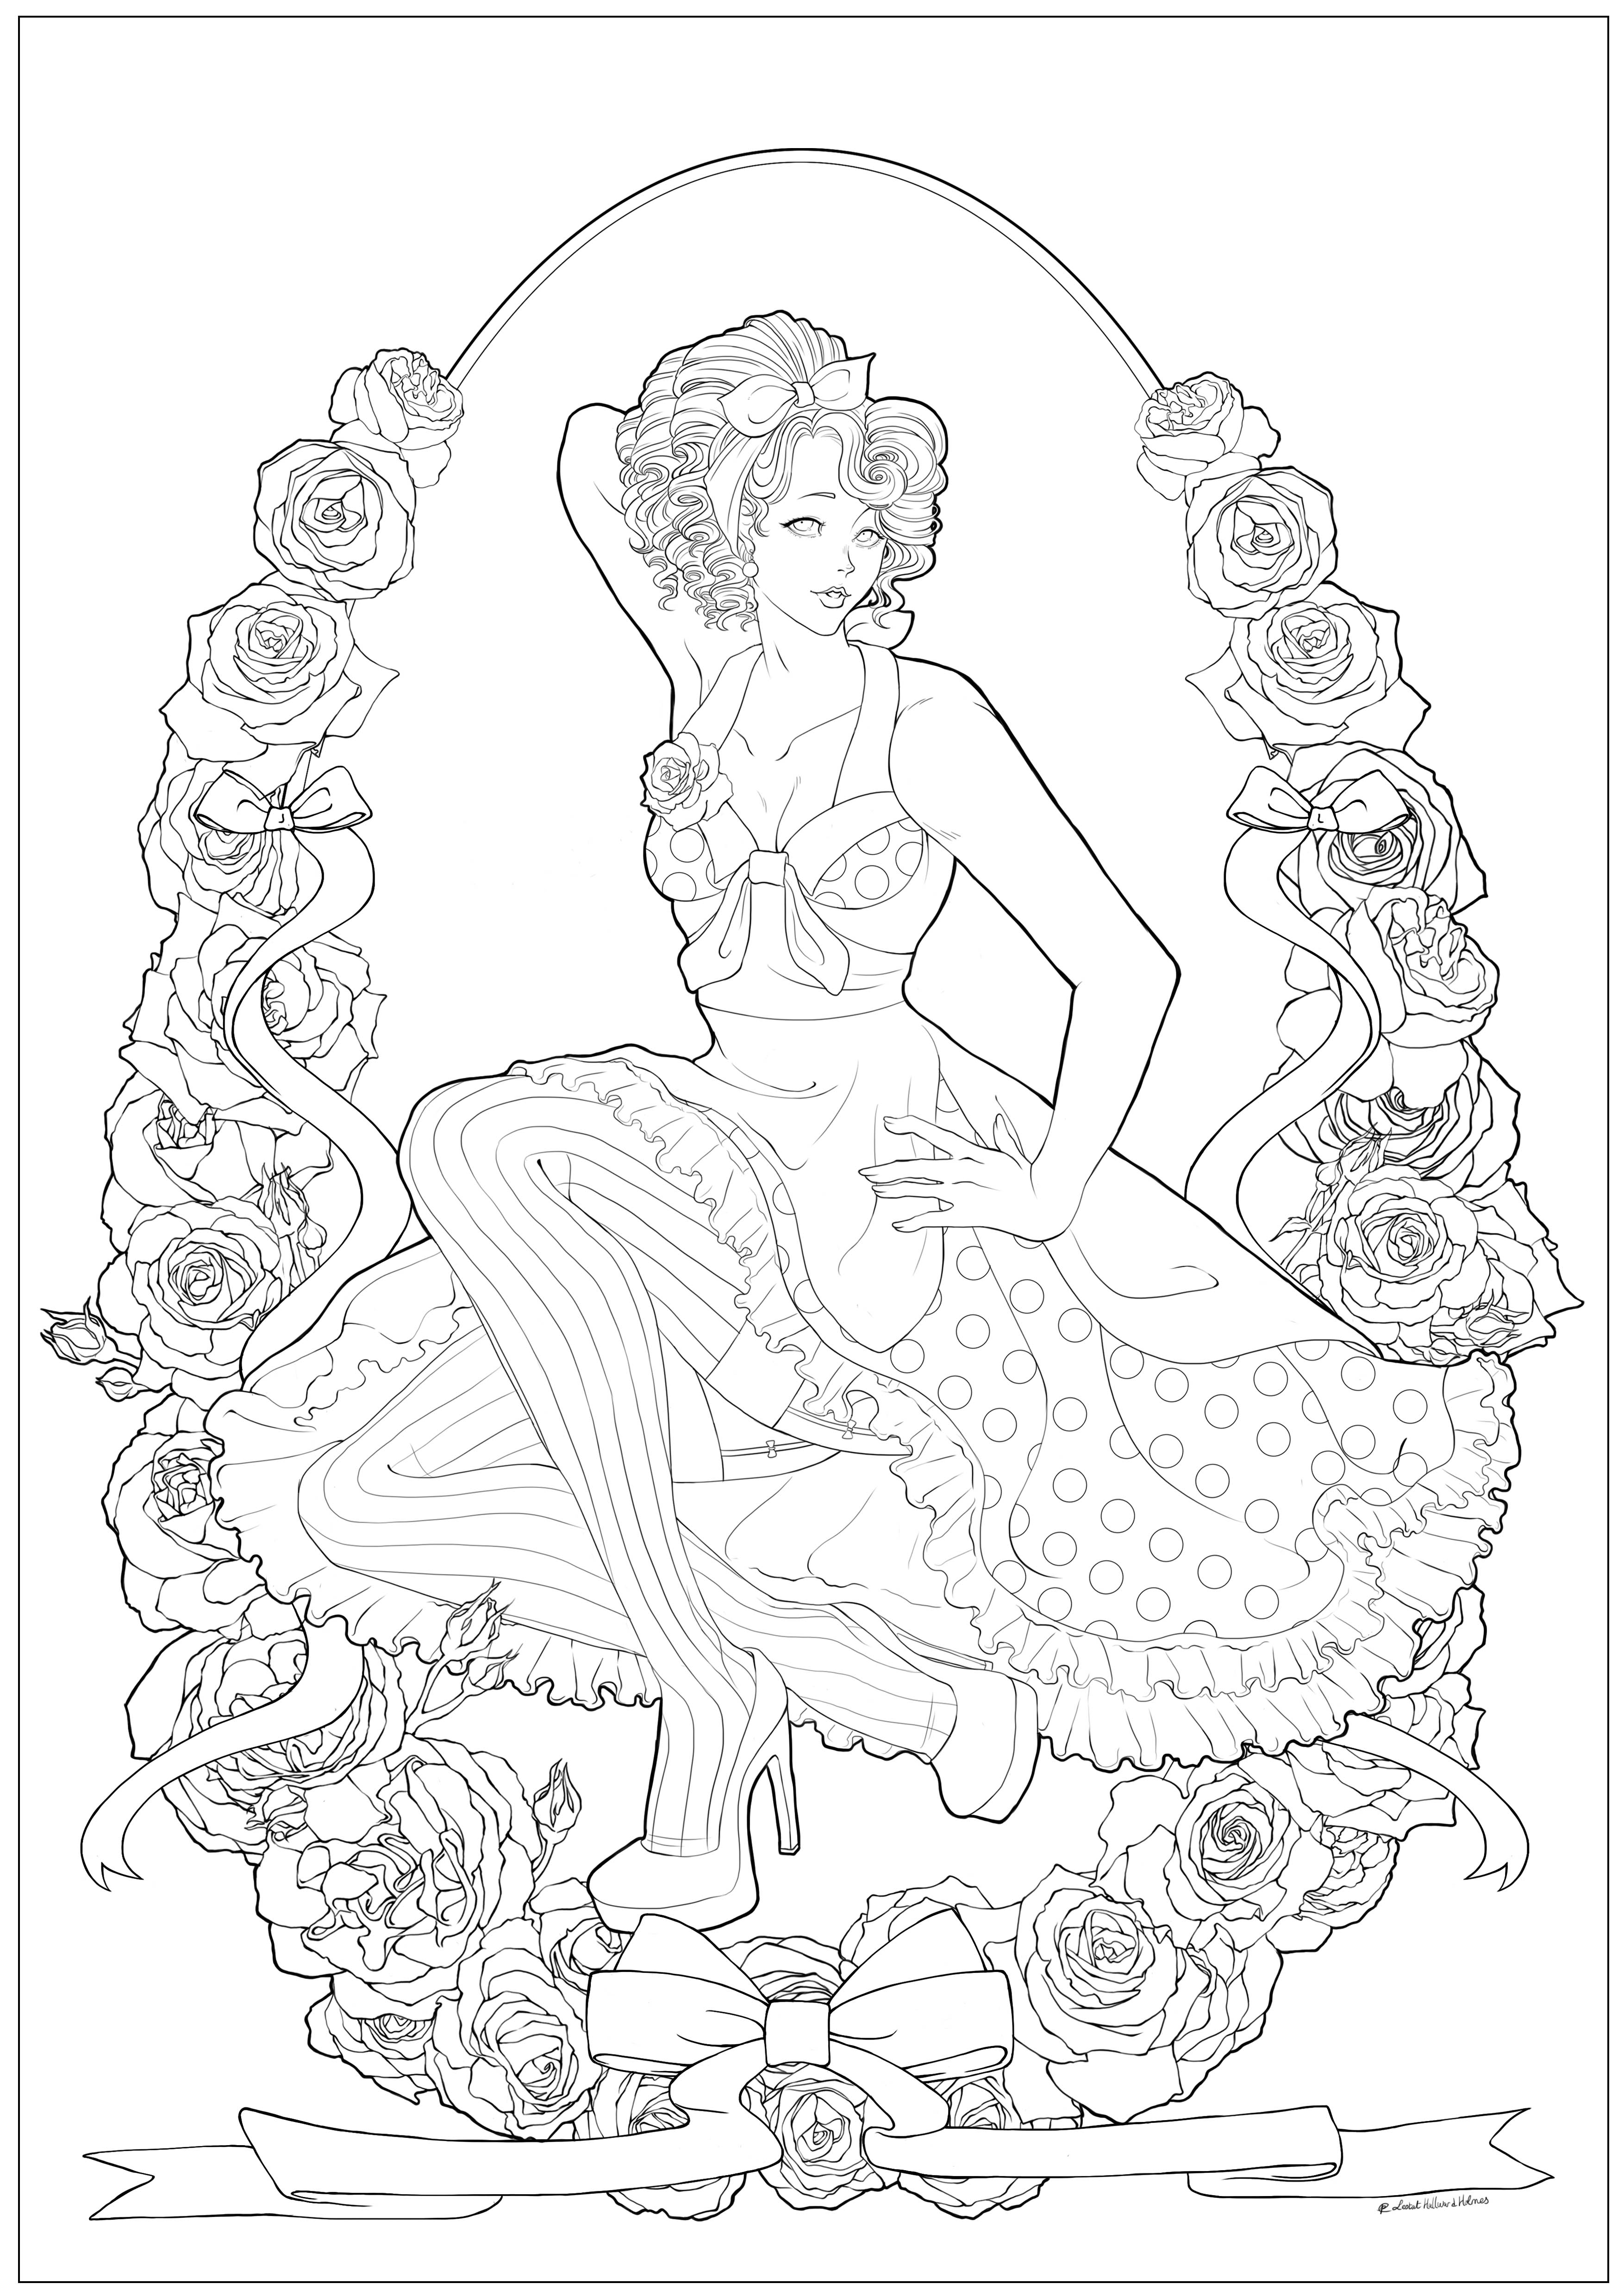 Vintage And Retro Pdf Printable Coloring Book By Collette Art And Collectibles Digital Jan